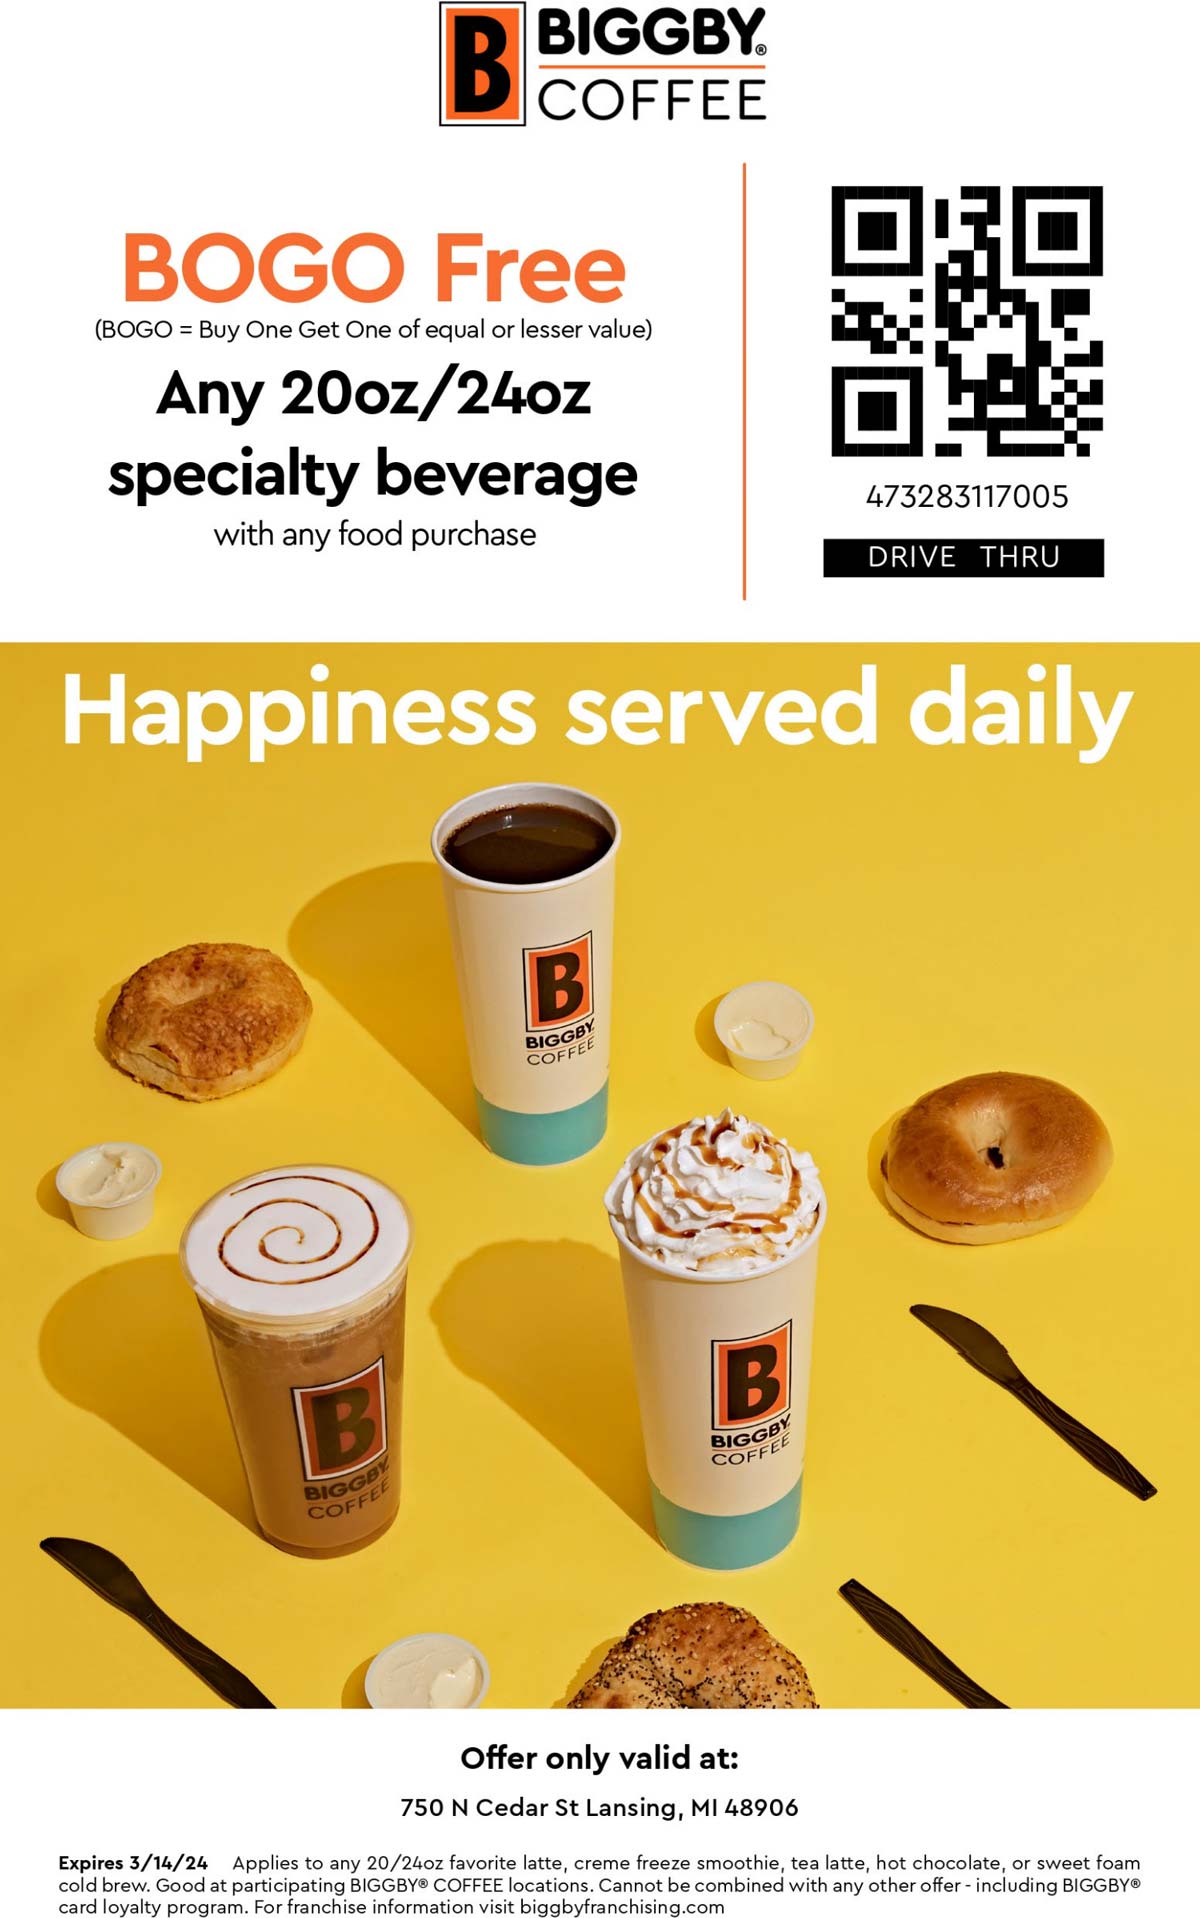 Biggby Coffee restaurants Coupon  Second beverage free with your food at Biggby Coffee #biggbycoffee 